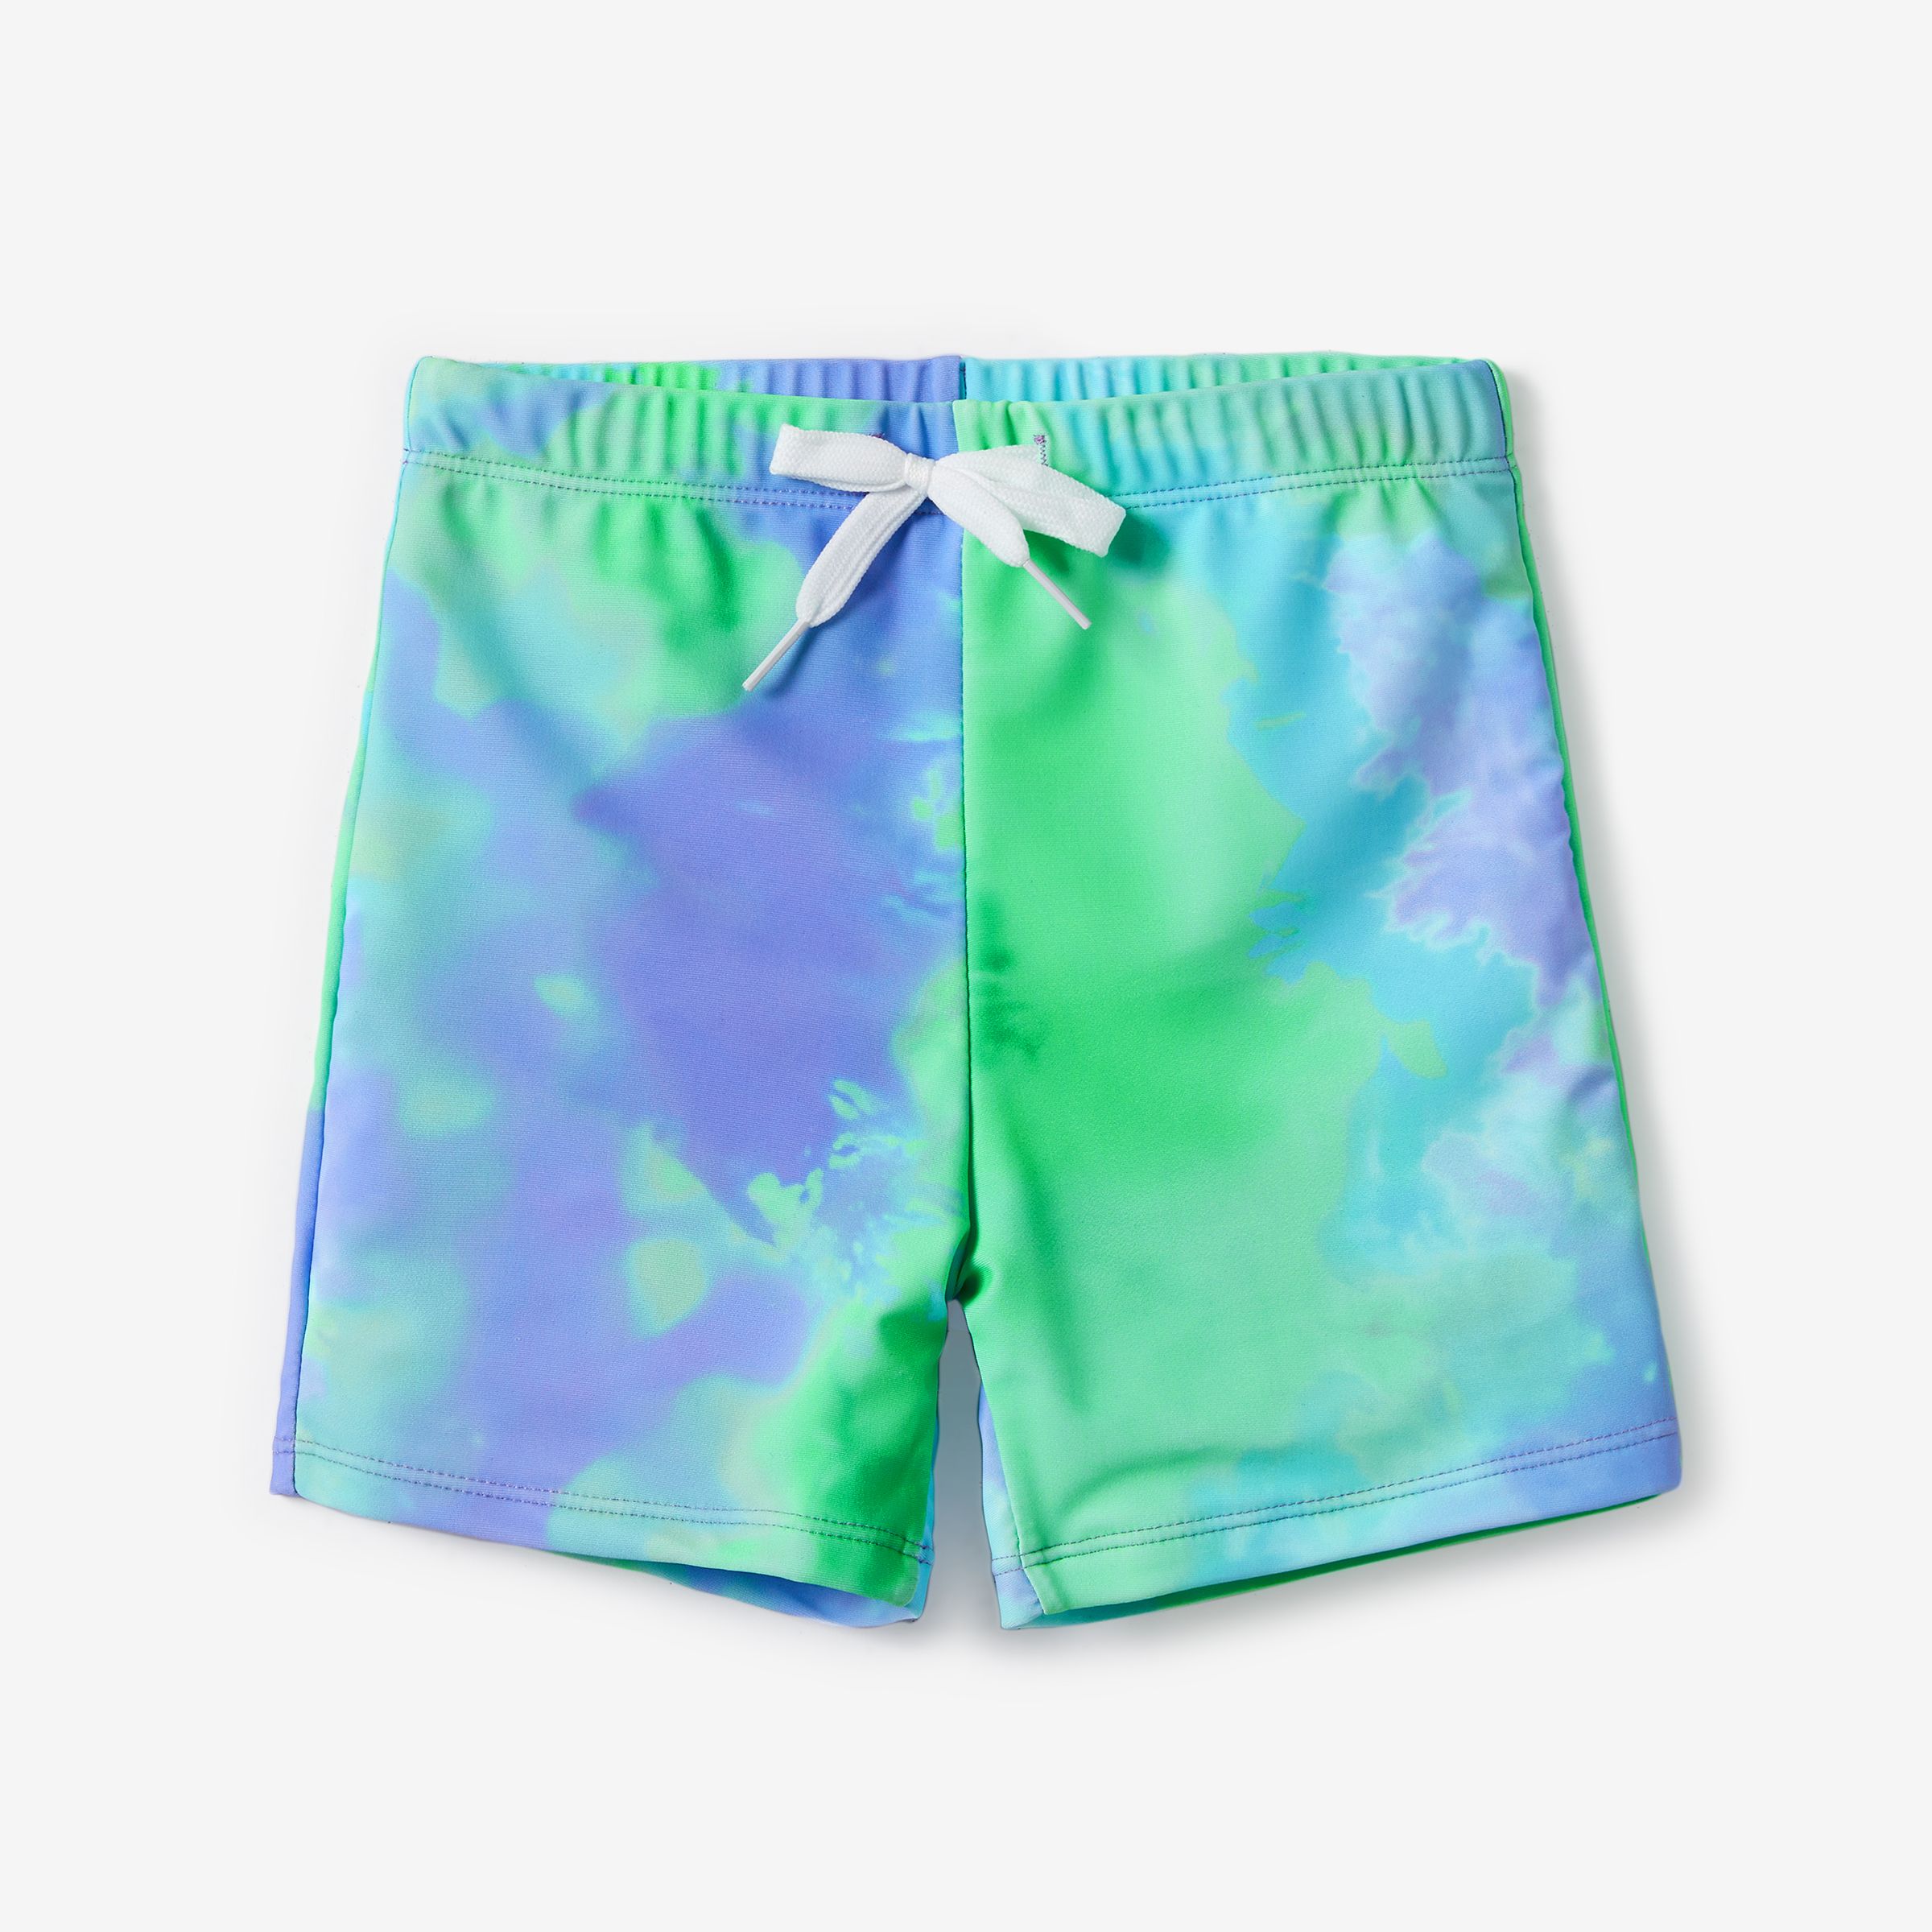 Family Matching Tie-dyed Drawstring Swim Trunks or Ruched Tie Side Cross Back Strap Swimsuit